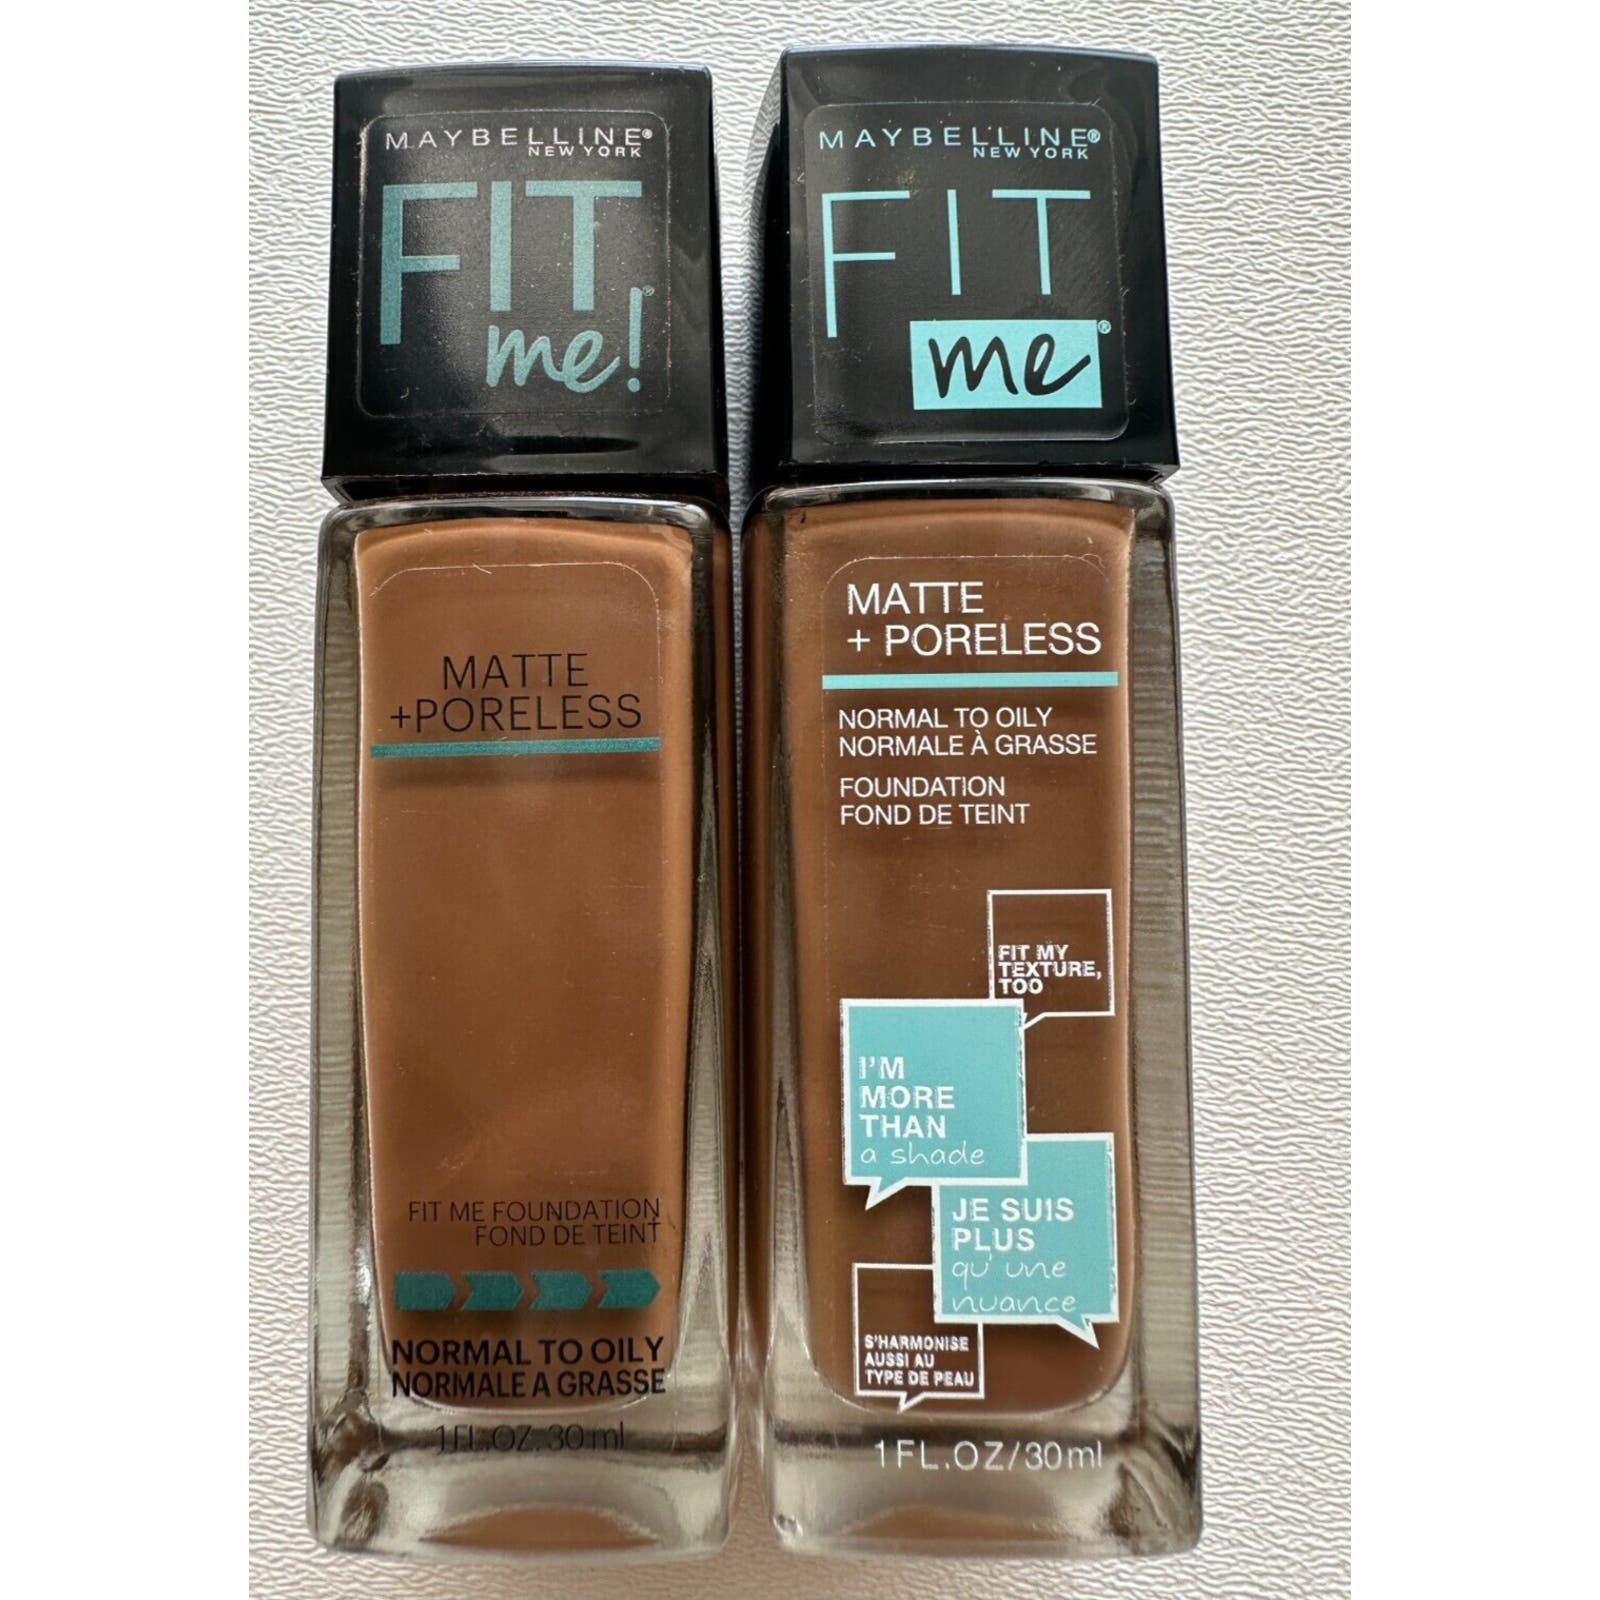 2X Maybelline Fit Me Foundation Matte + Poreless Normal to Oily Skin 362 Truffle eFpxN7x67